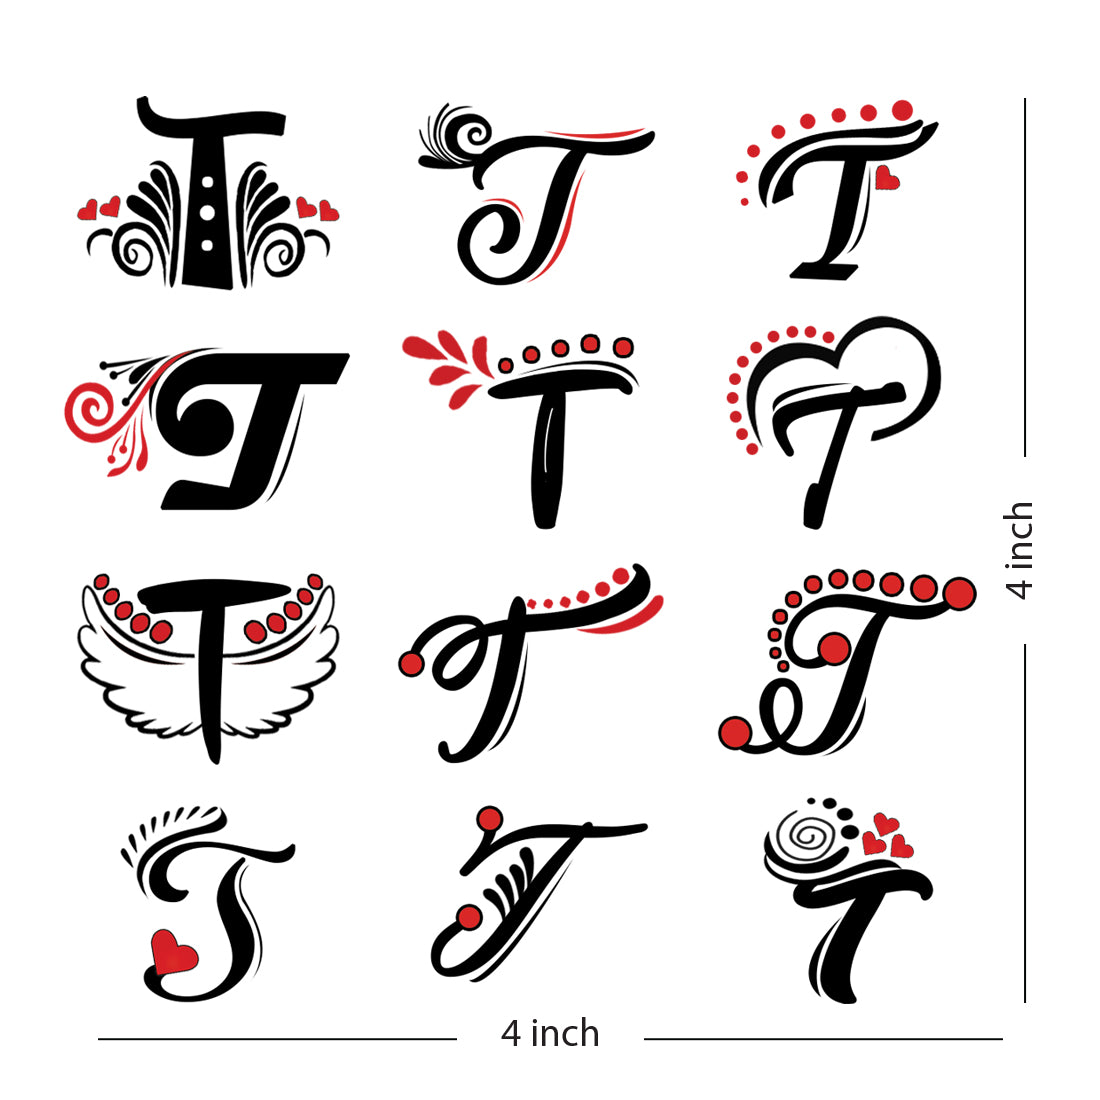 40 Letter T Tattoos Designs, Ideas and Templates - YouTube